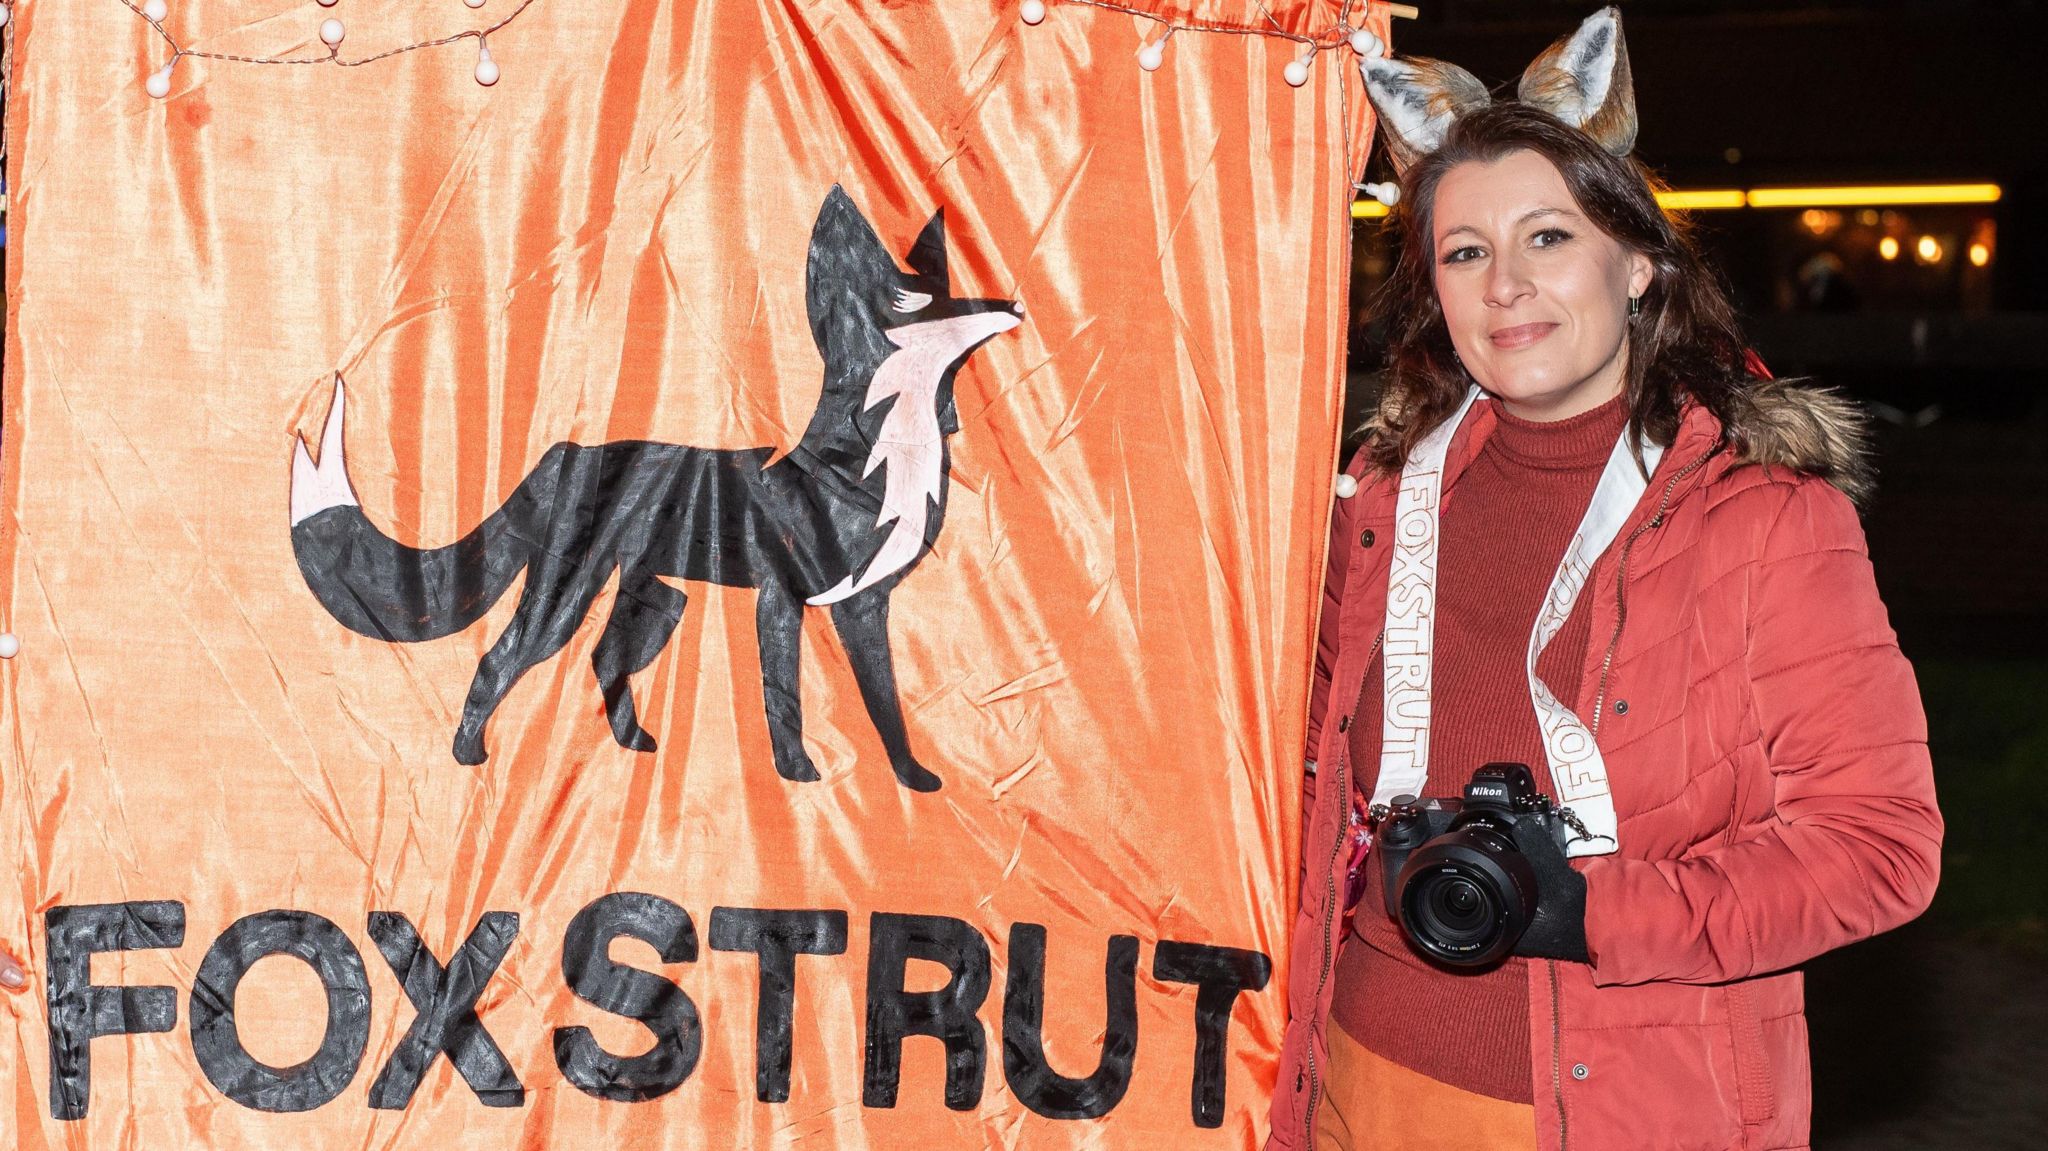 Jayne Jackson, co-founder of Fox Strut, wearing fox ears and a deep red and orange outfit, and holding an orange Fox Strut banner and a camera